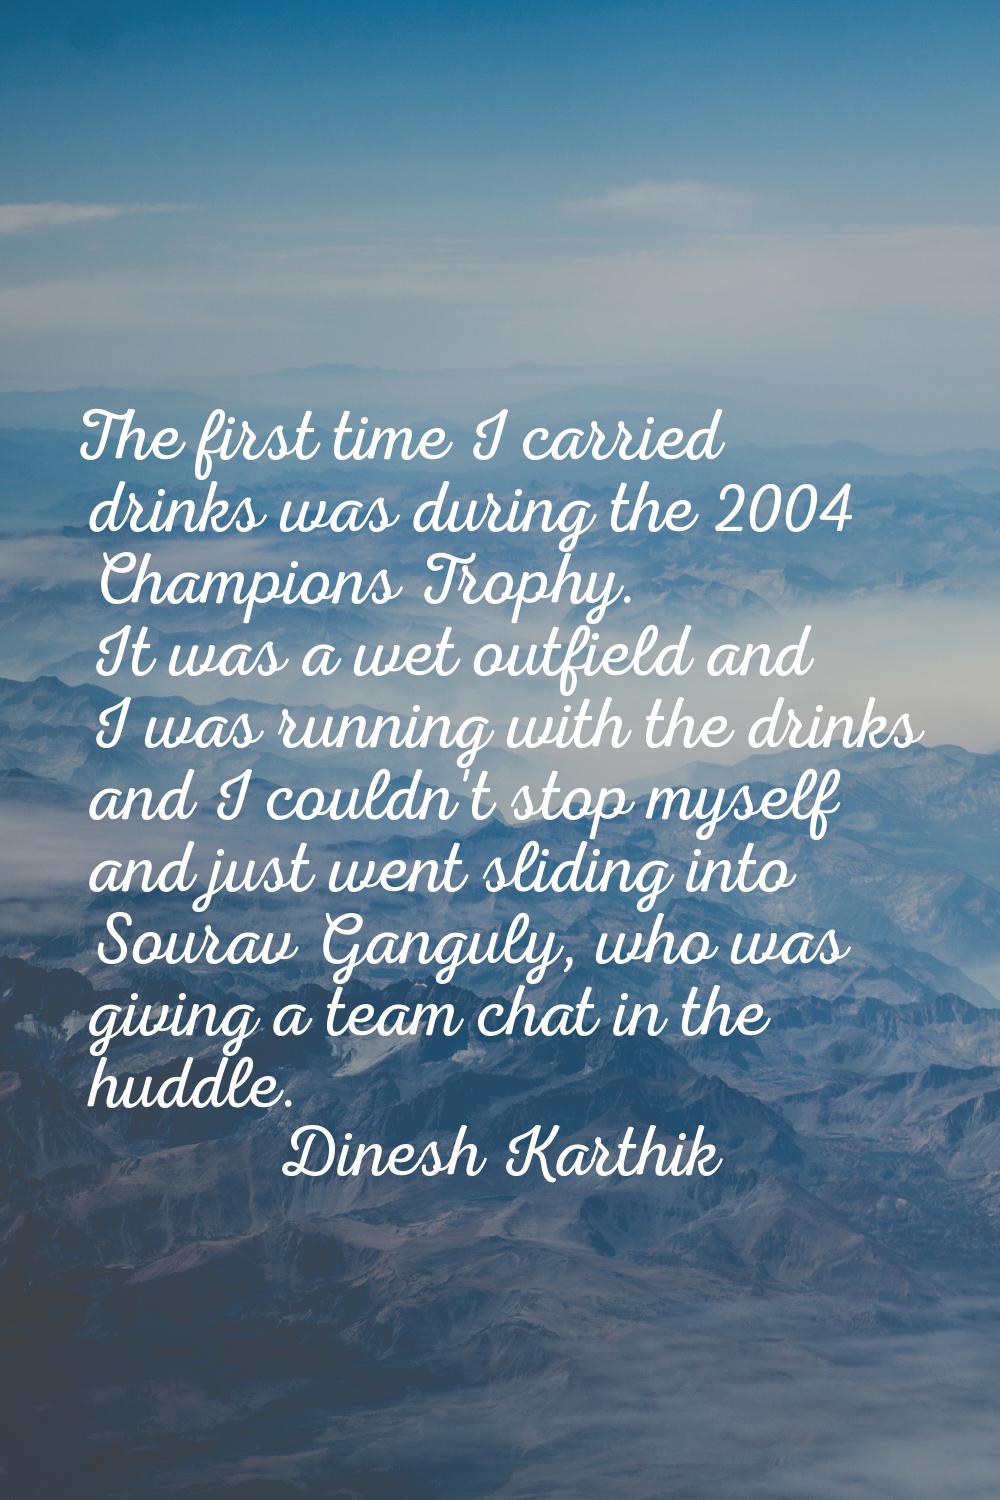 The first time I carried drinks was during the 2004 Champions Trophy. It was a wet outfield and I w